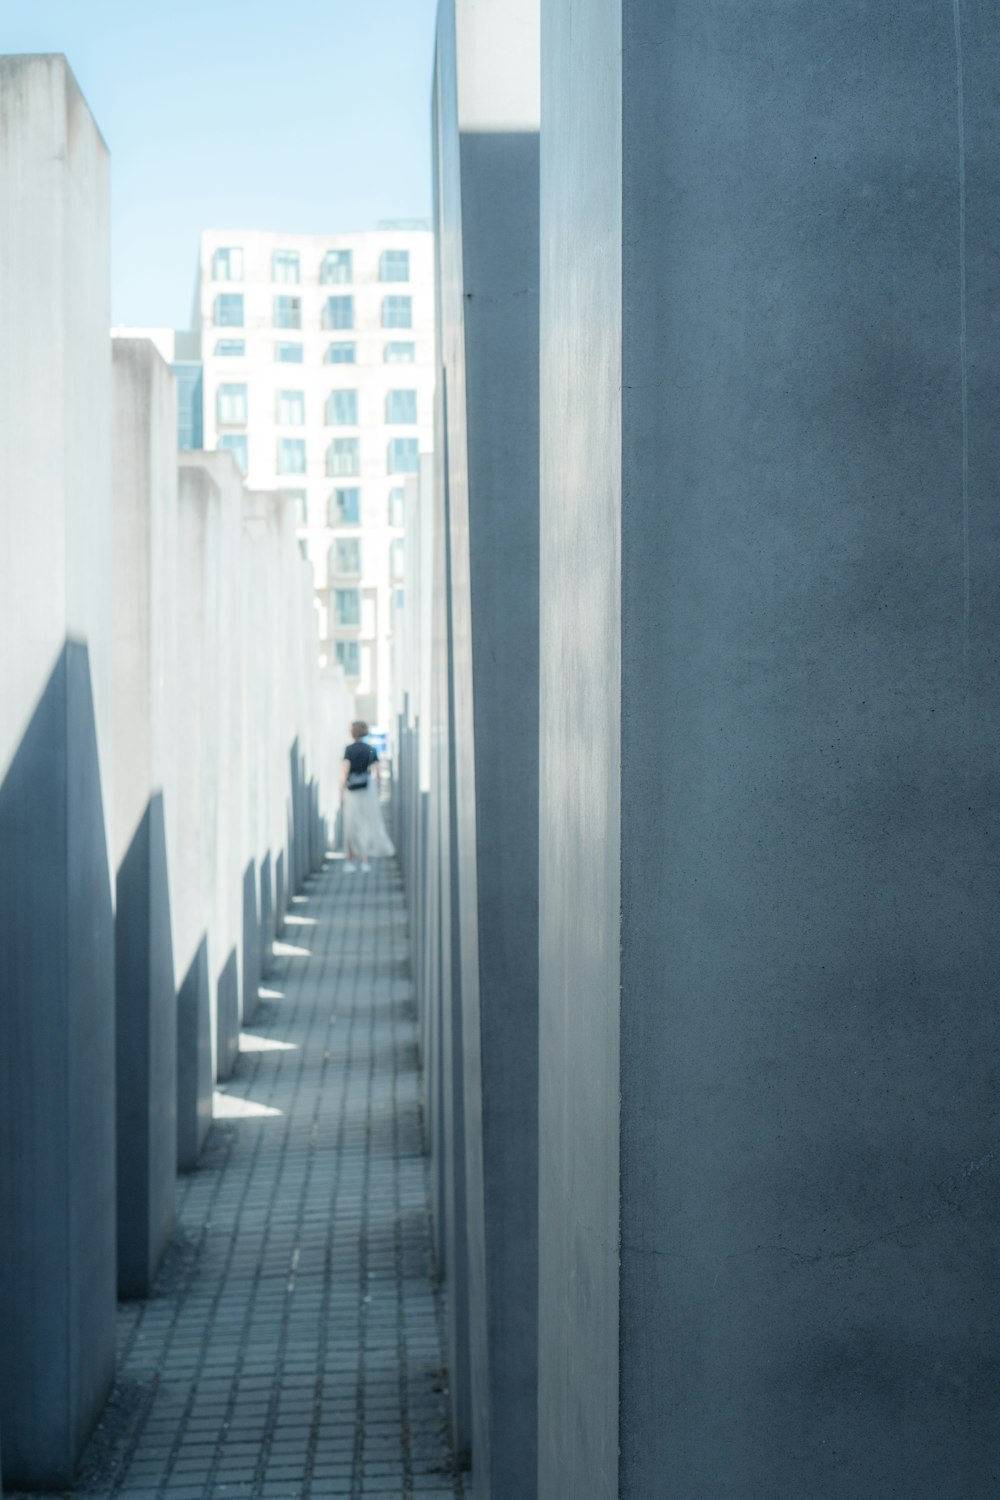 a person walking down a sidewalk next to tall buildings